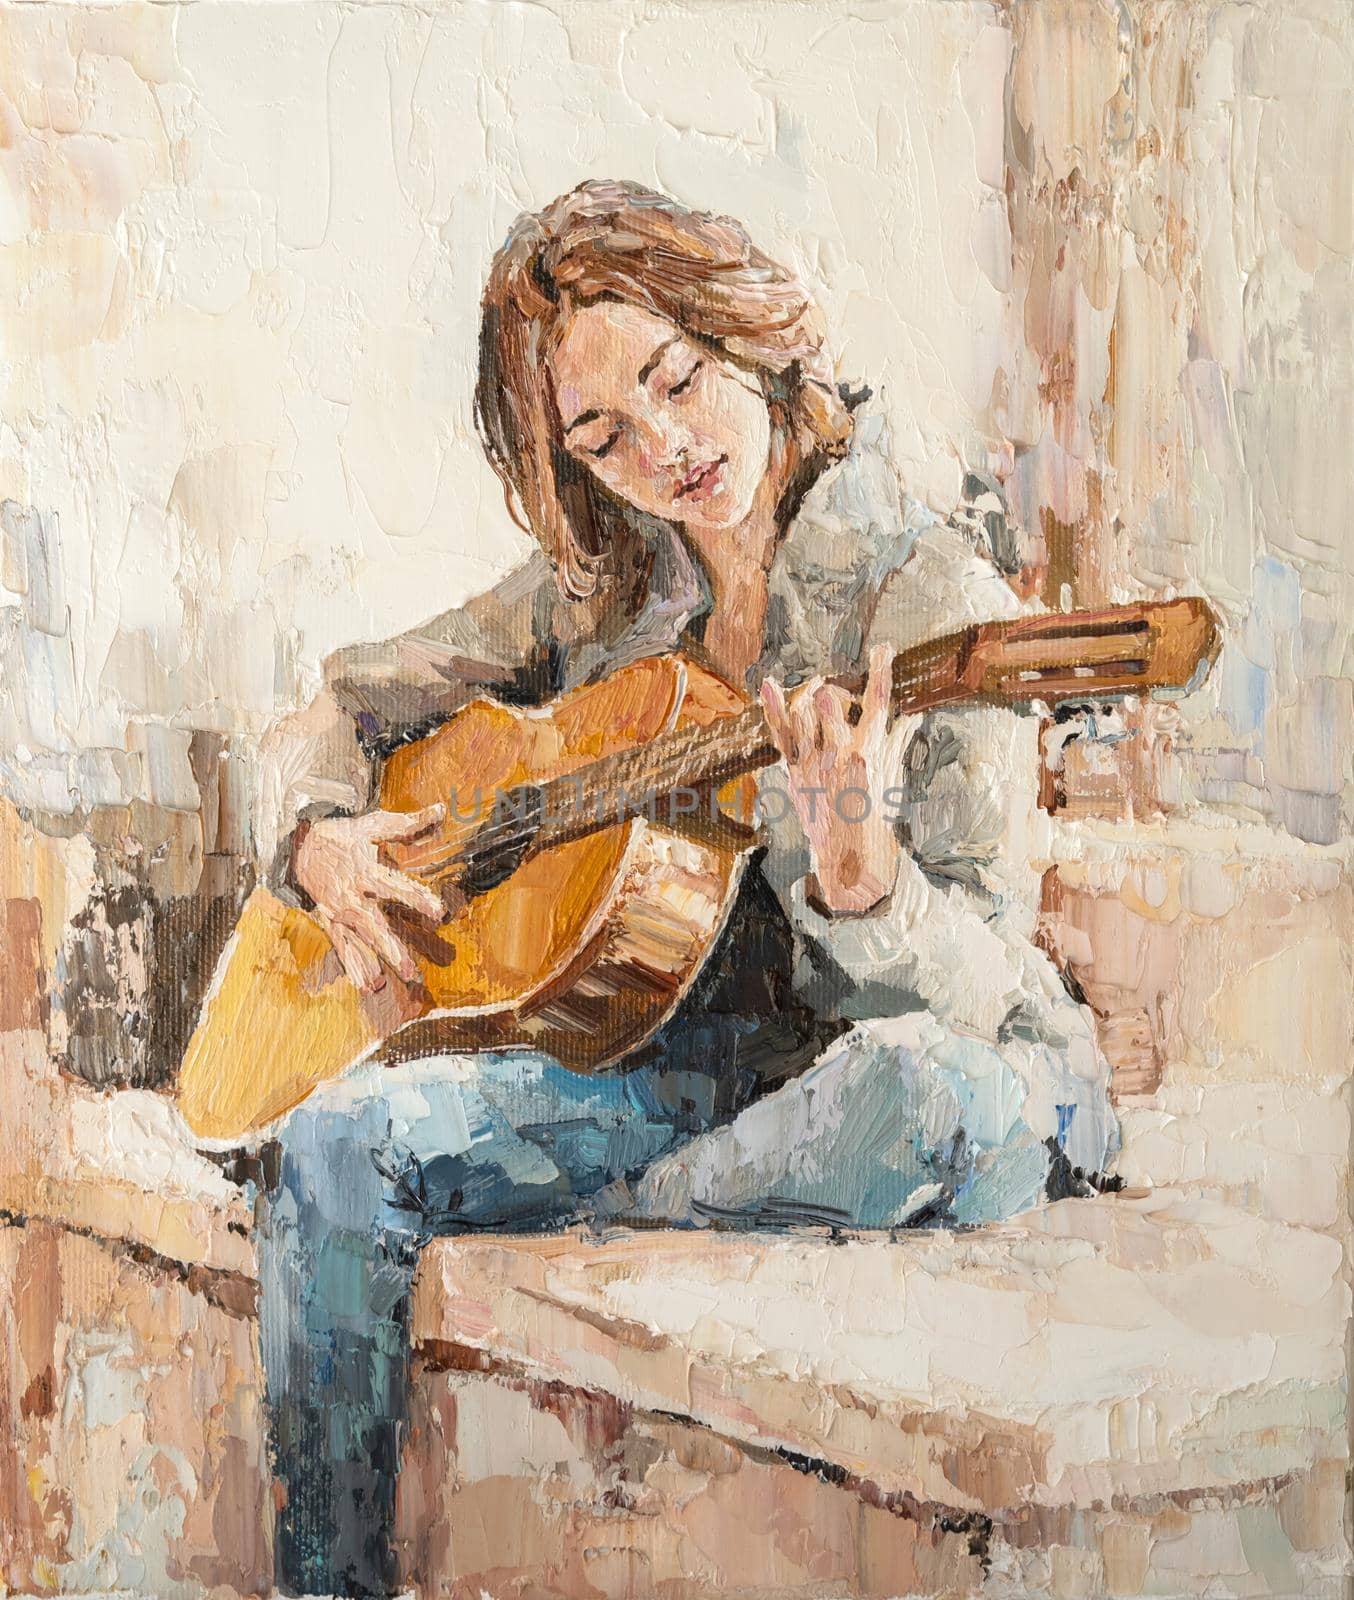 .The girl plays the guitar. by jannojan